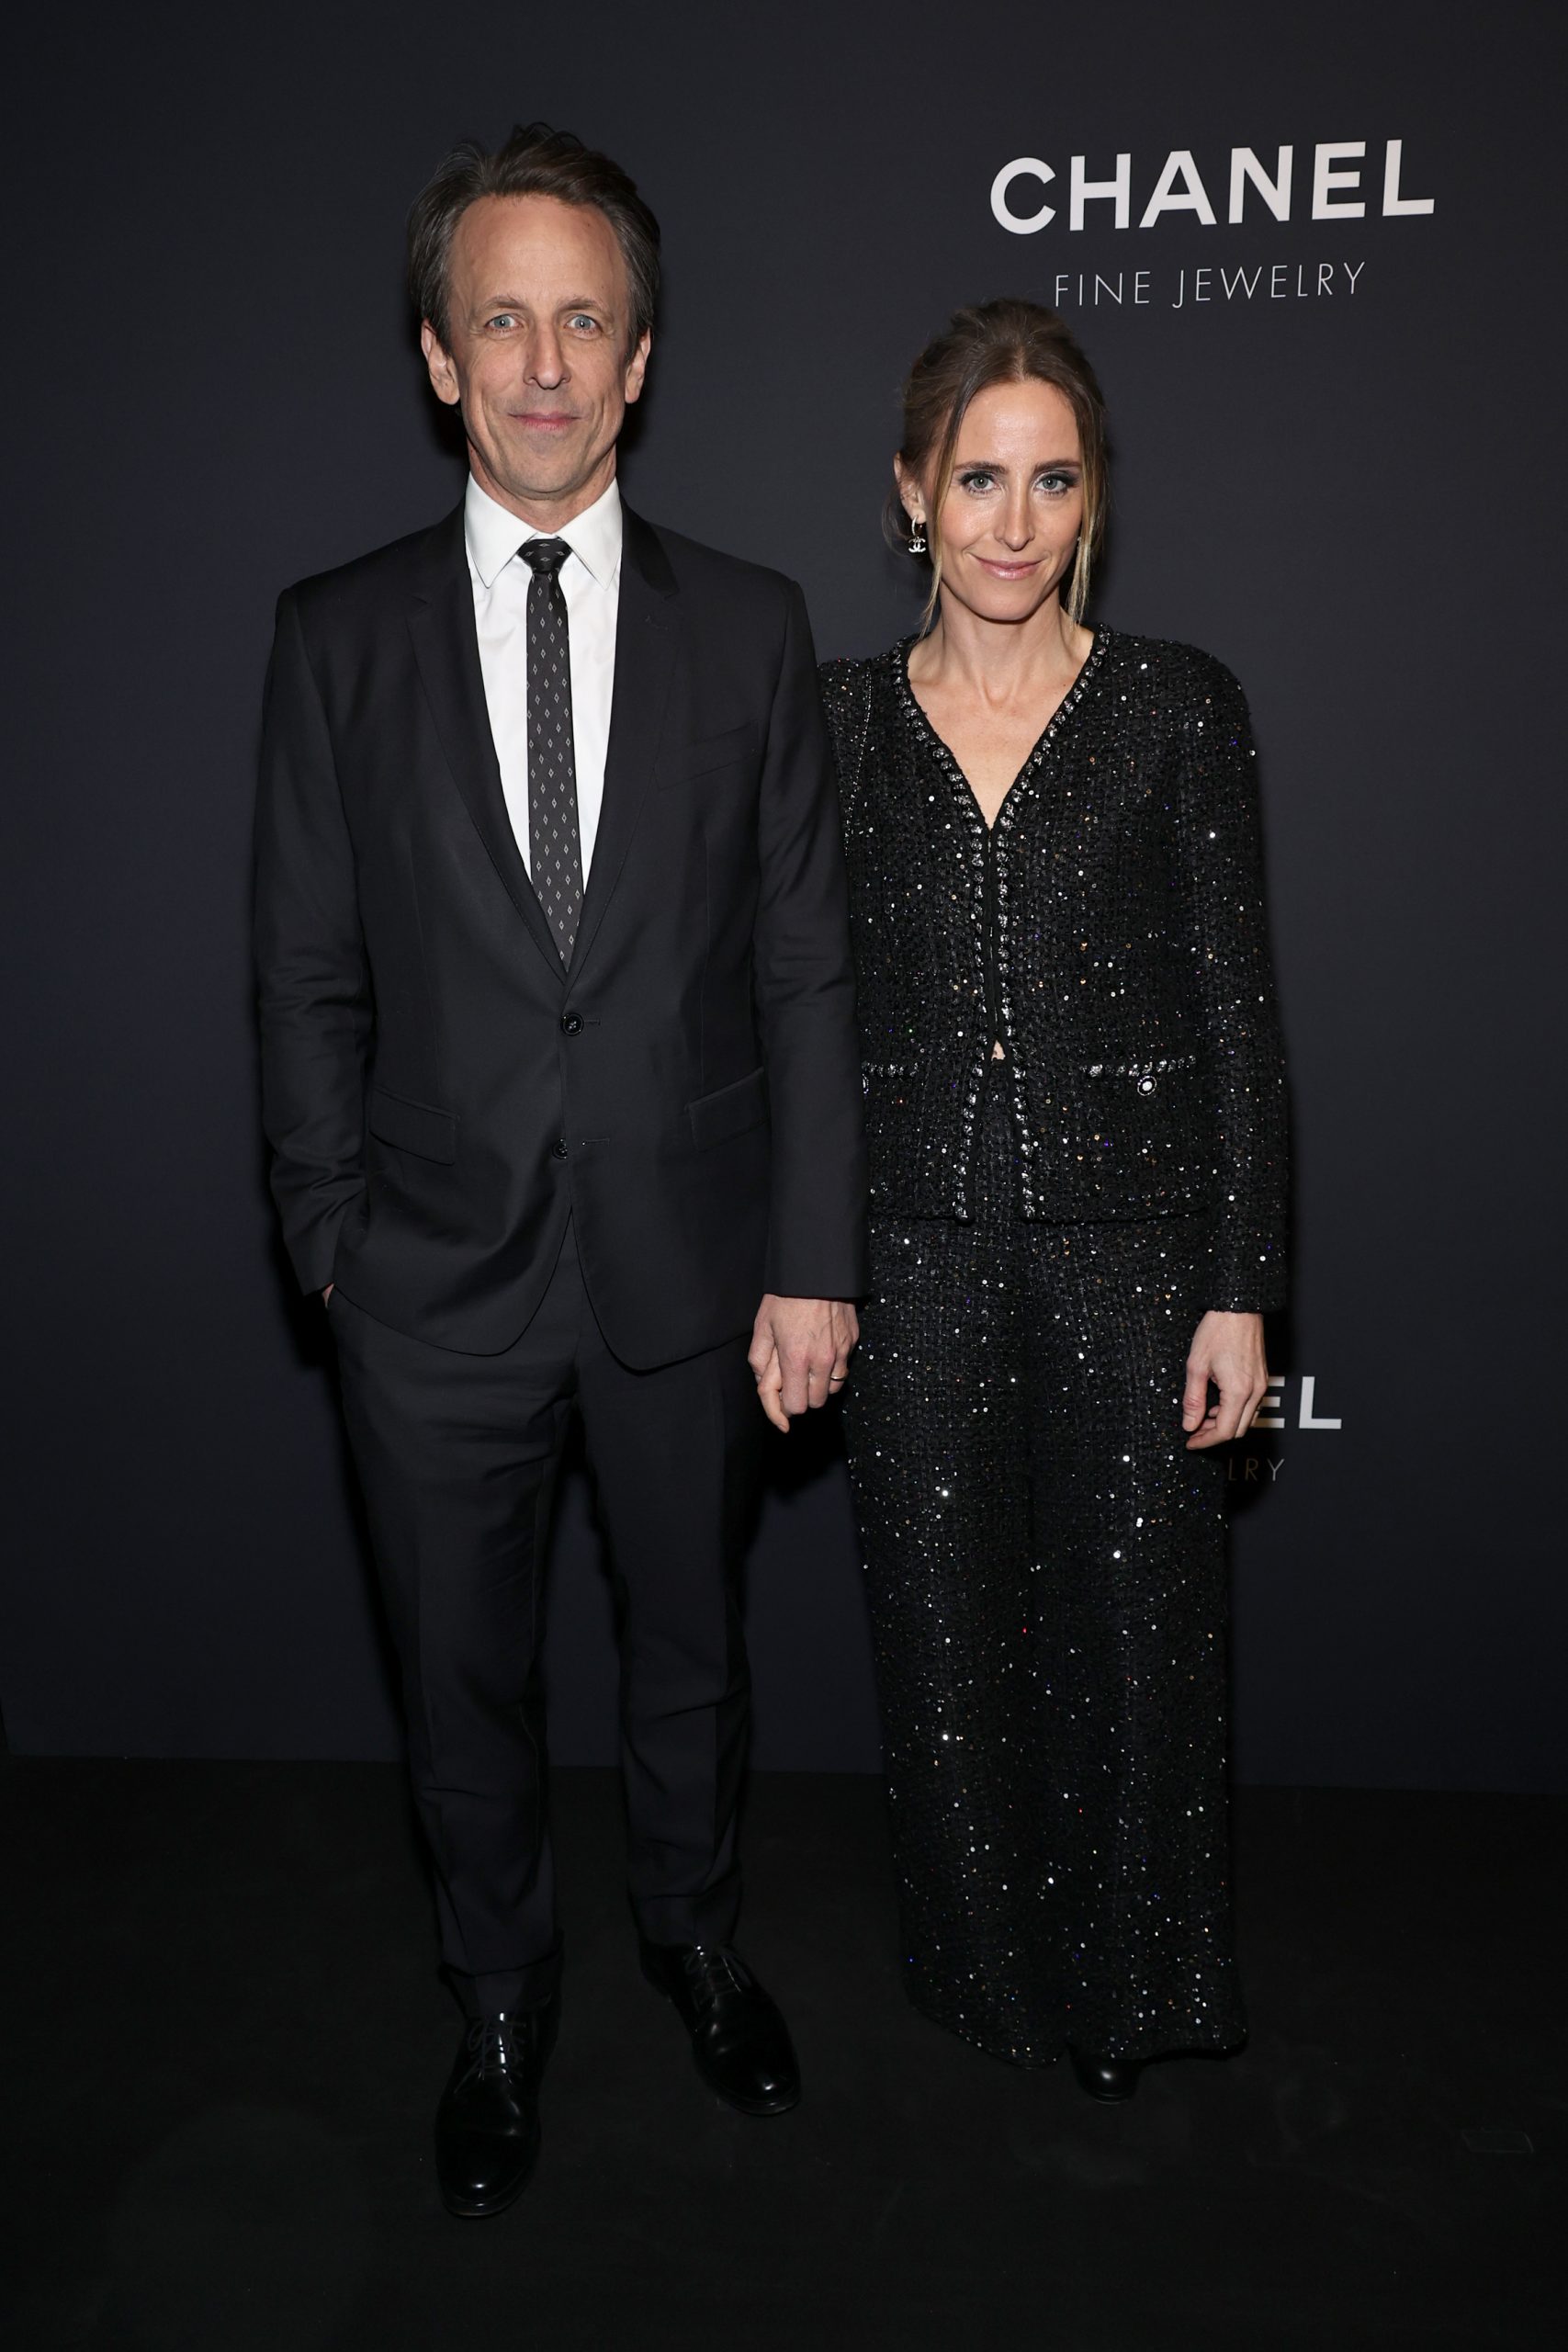 NEW YORK, NEW YORK - FEBRUARY 07: Seth Meyers and Alexi Ashe, wearing CHANEL, attend the CHANEL Dinner to celebrate the Watches & Fine Jewelry Fifth Avenue Flagship Boutique Opening on February 07, 2024 in New York City. (Photo by Jamie McCarthy/WireImage)